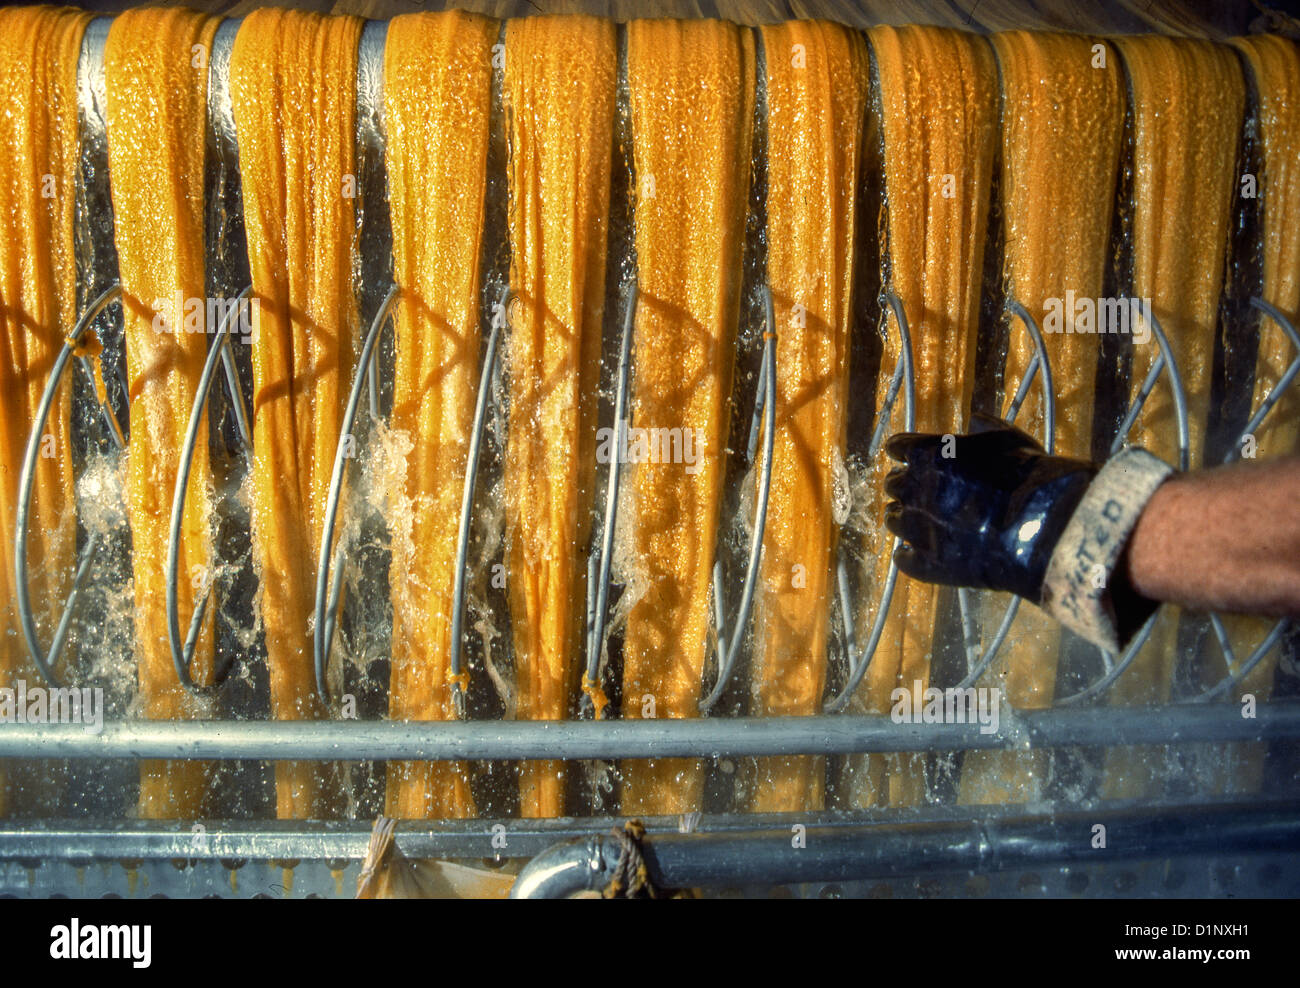 Cotton yarn is colored yellow at a commercial cloth dyeing factory in Manchester, New Hampshire. Stock Photo